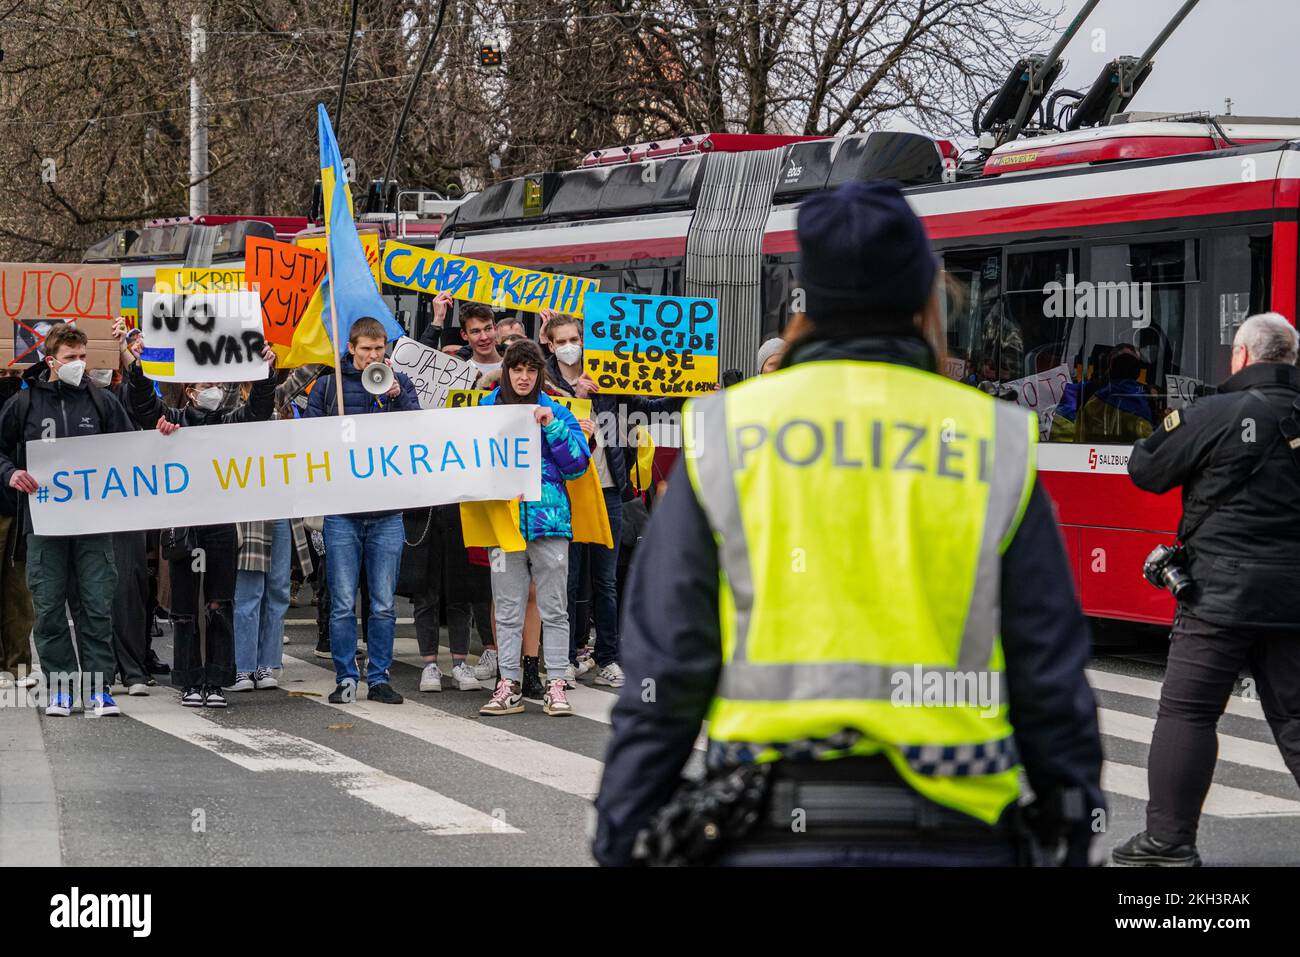 Police secure a demonstration in Salzburg, Austria against the Russian war in Ukraine. Stock Photo